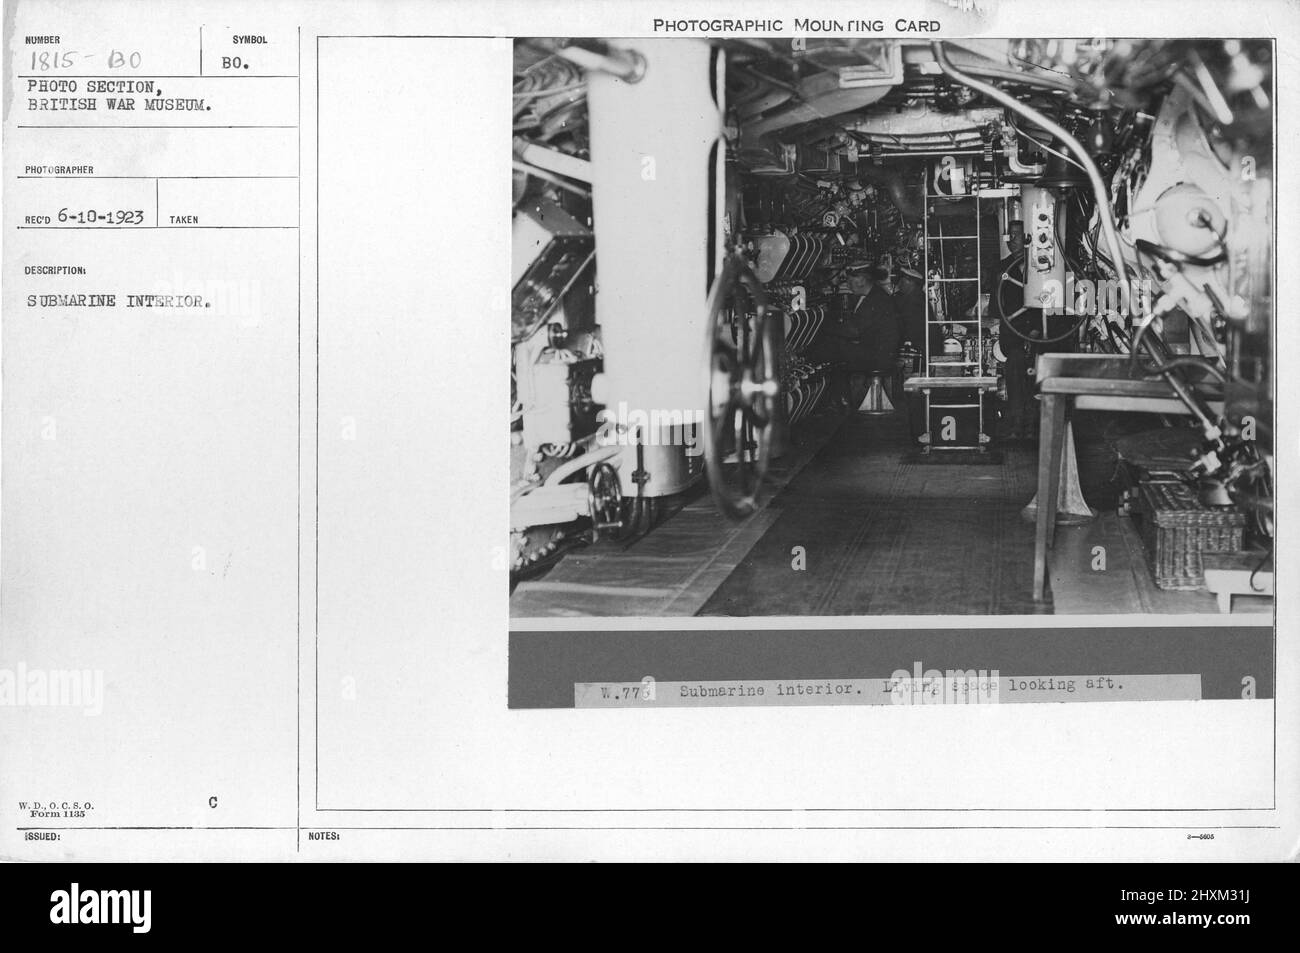 Submarine interior. Collection of World War I Photographs, 1914-1918 that depict the military activities of British and other nation's armed forces and personnel during World War I. Stock Photo